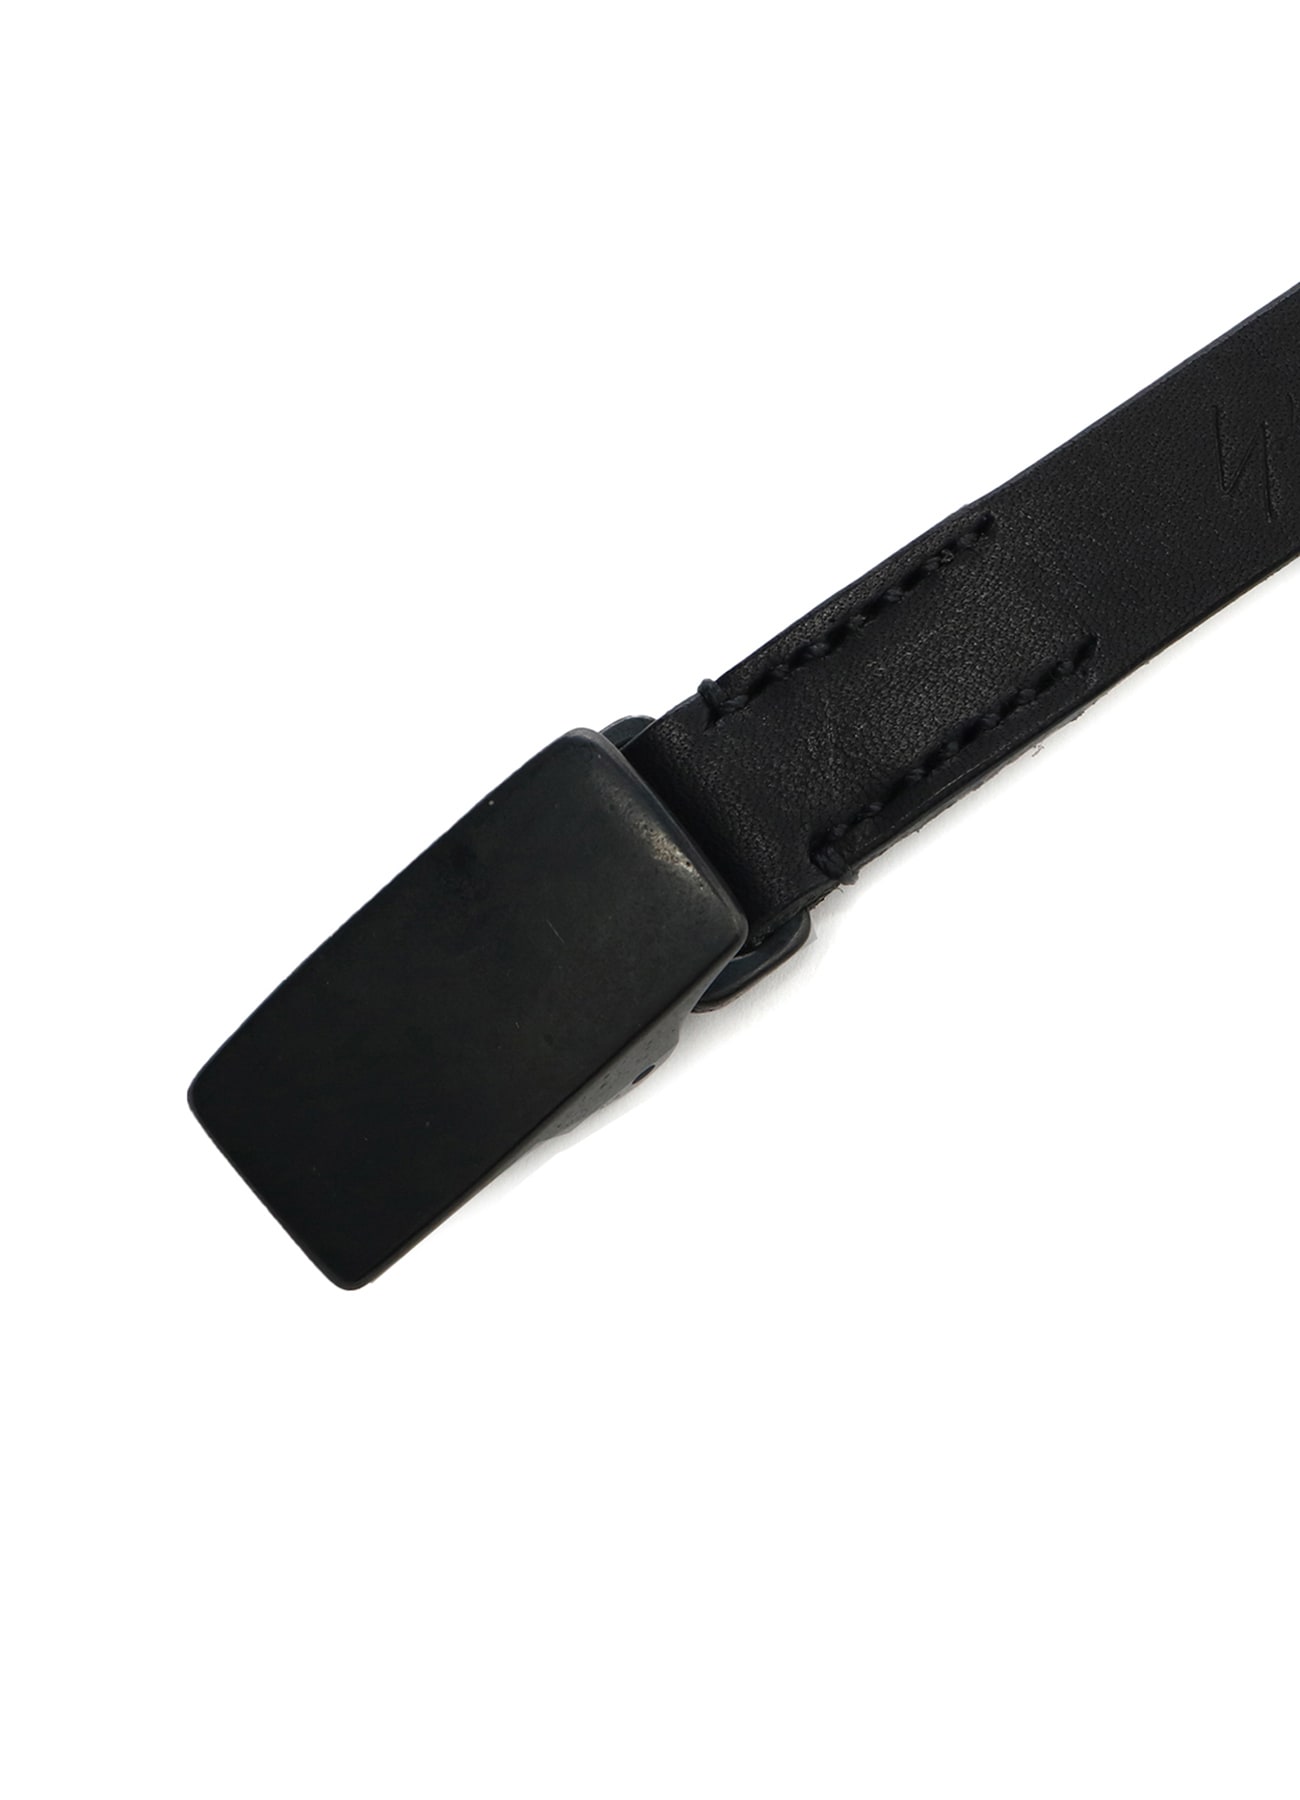 THICK SOFT LEATHER 18MM FREE BELT